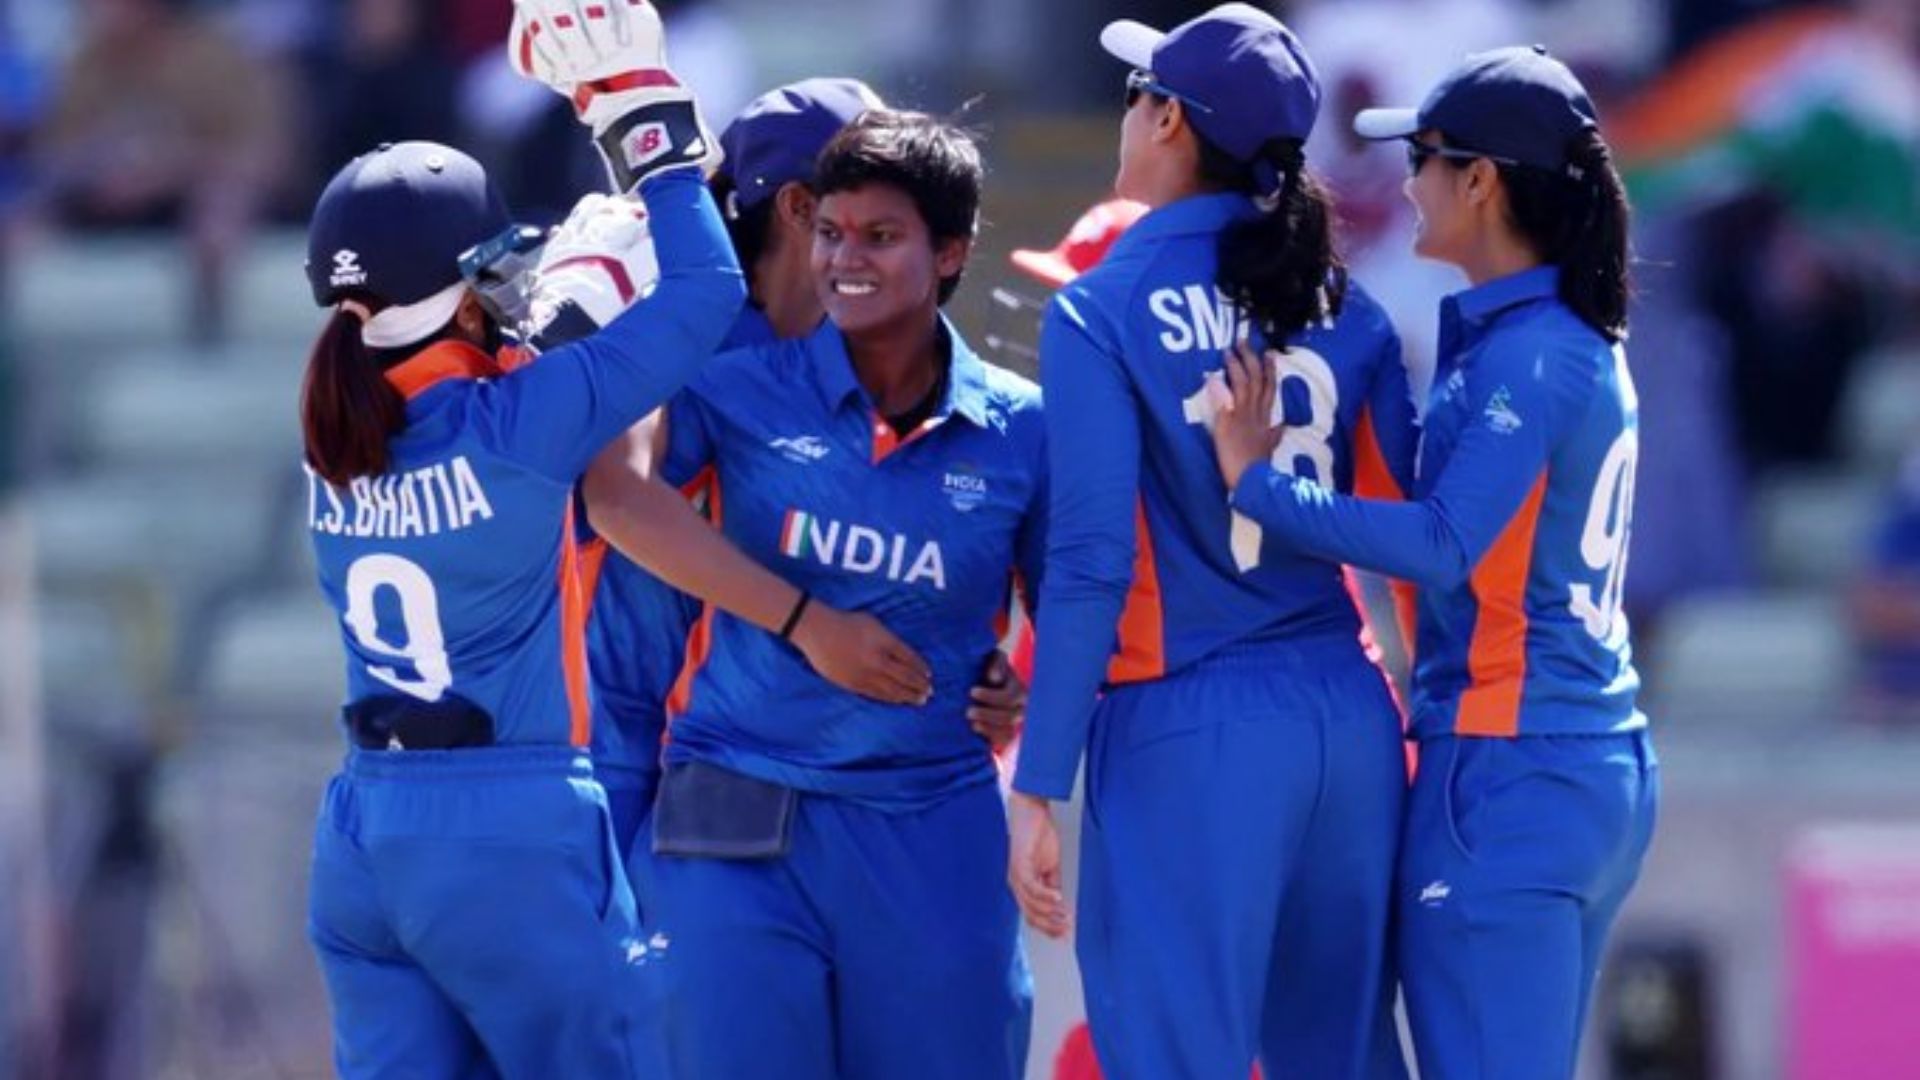 Indian Women Cricket Team Beats England To Reach The Finals At Commonwealth Games, 2022. We Wish Them The Very Best!